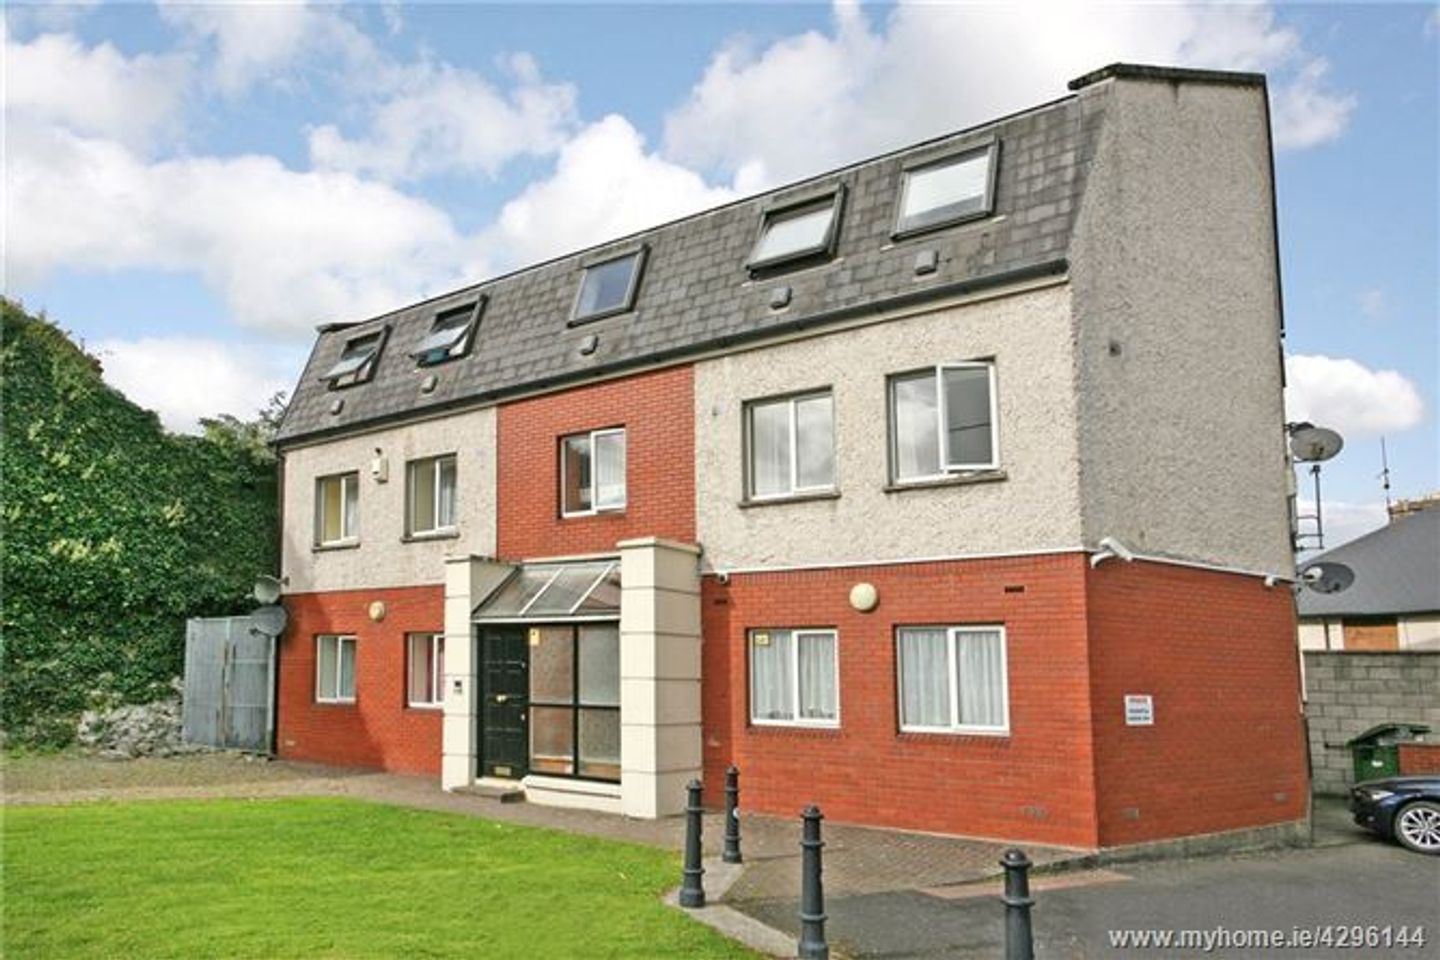 Apartment 3, Catherdral View Apartments, Limerick City, Co. Limerick, V94YT68